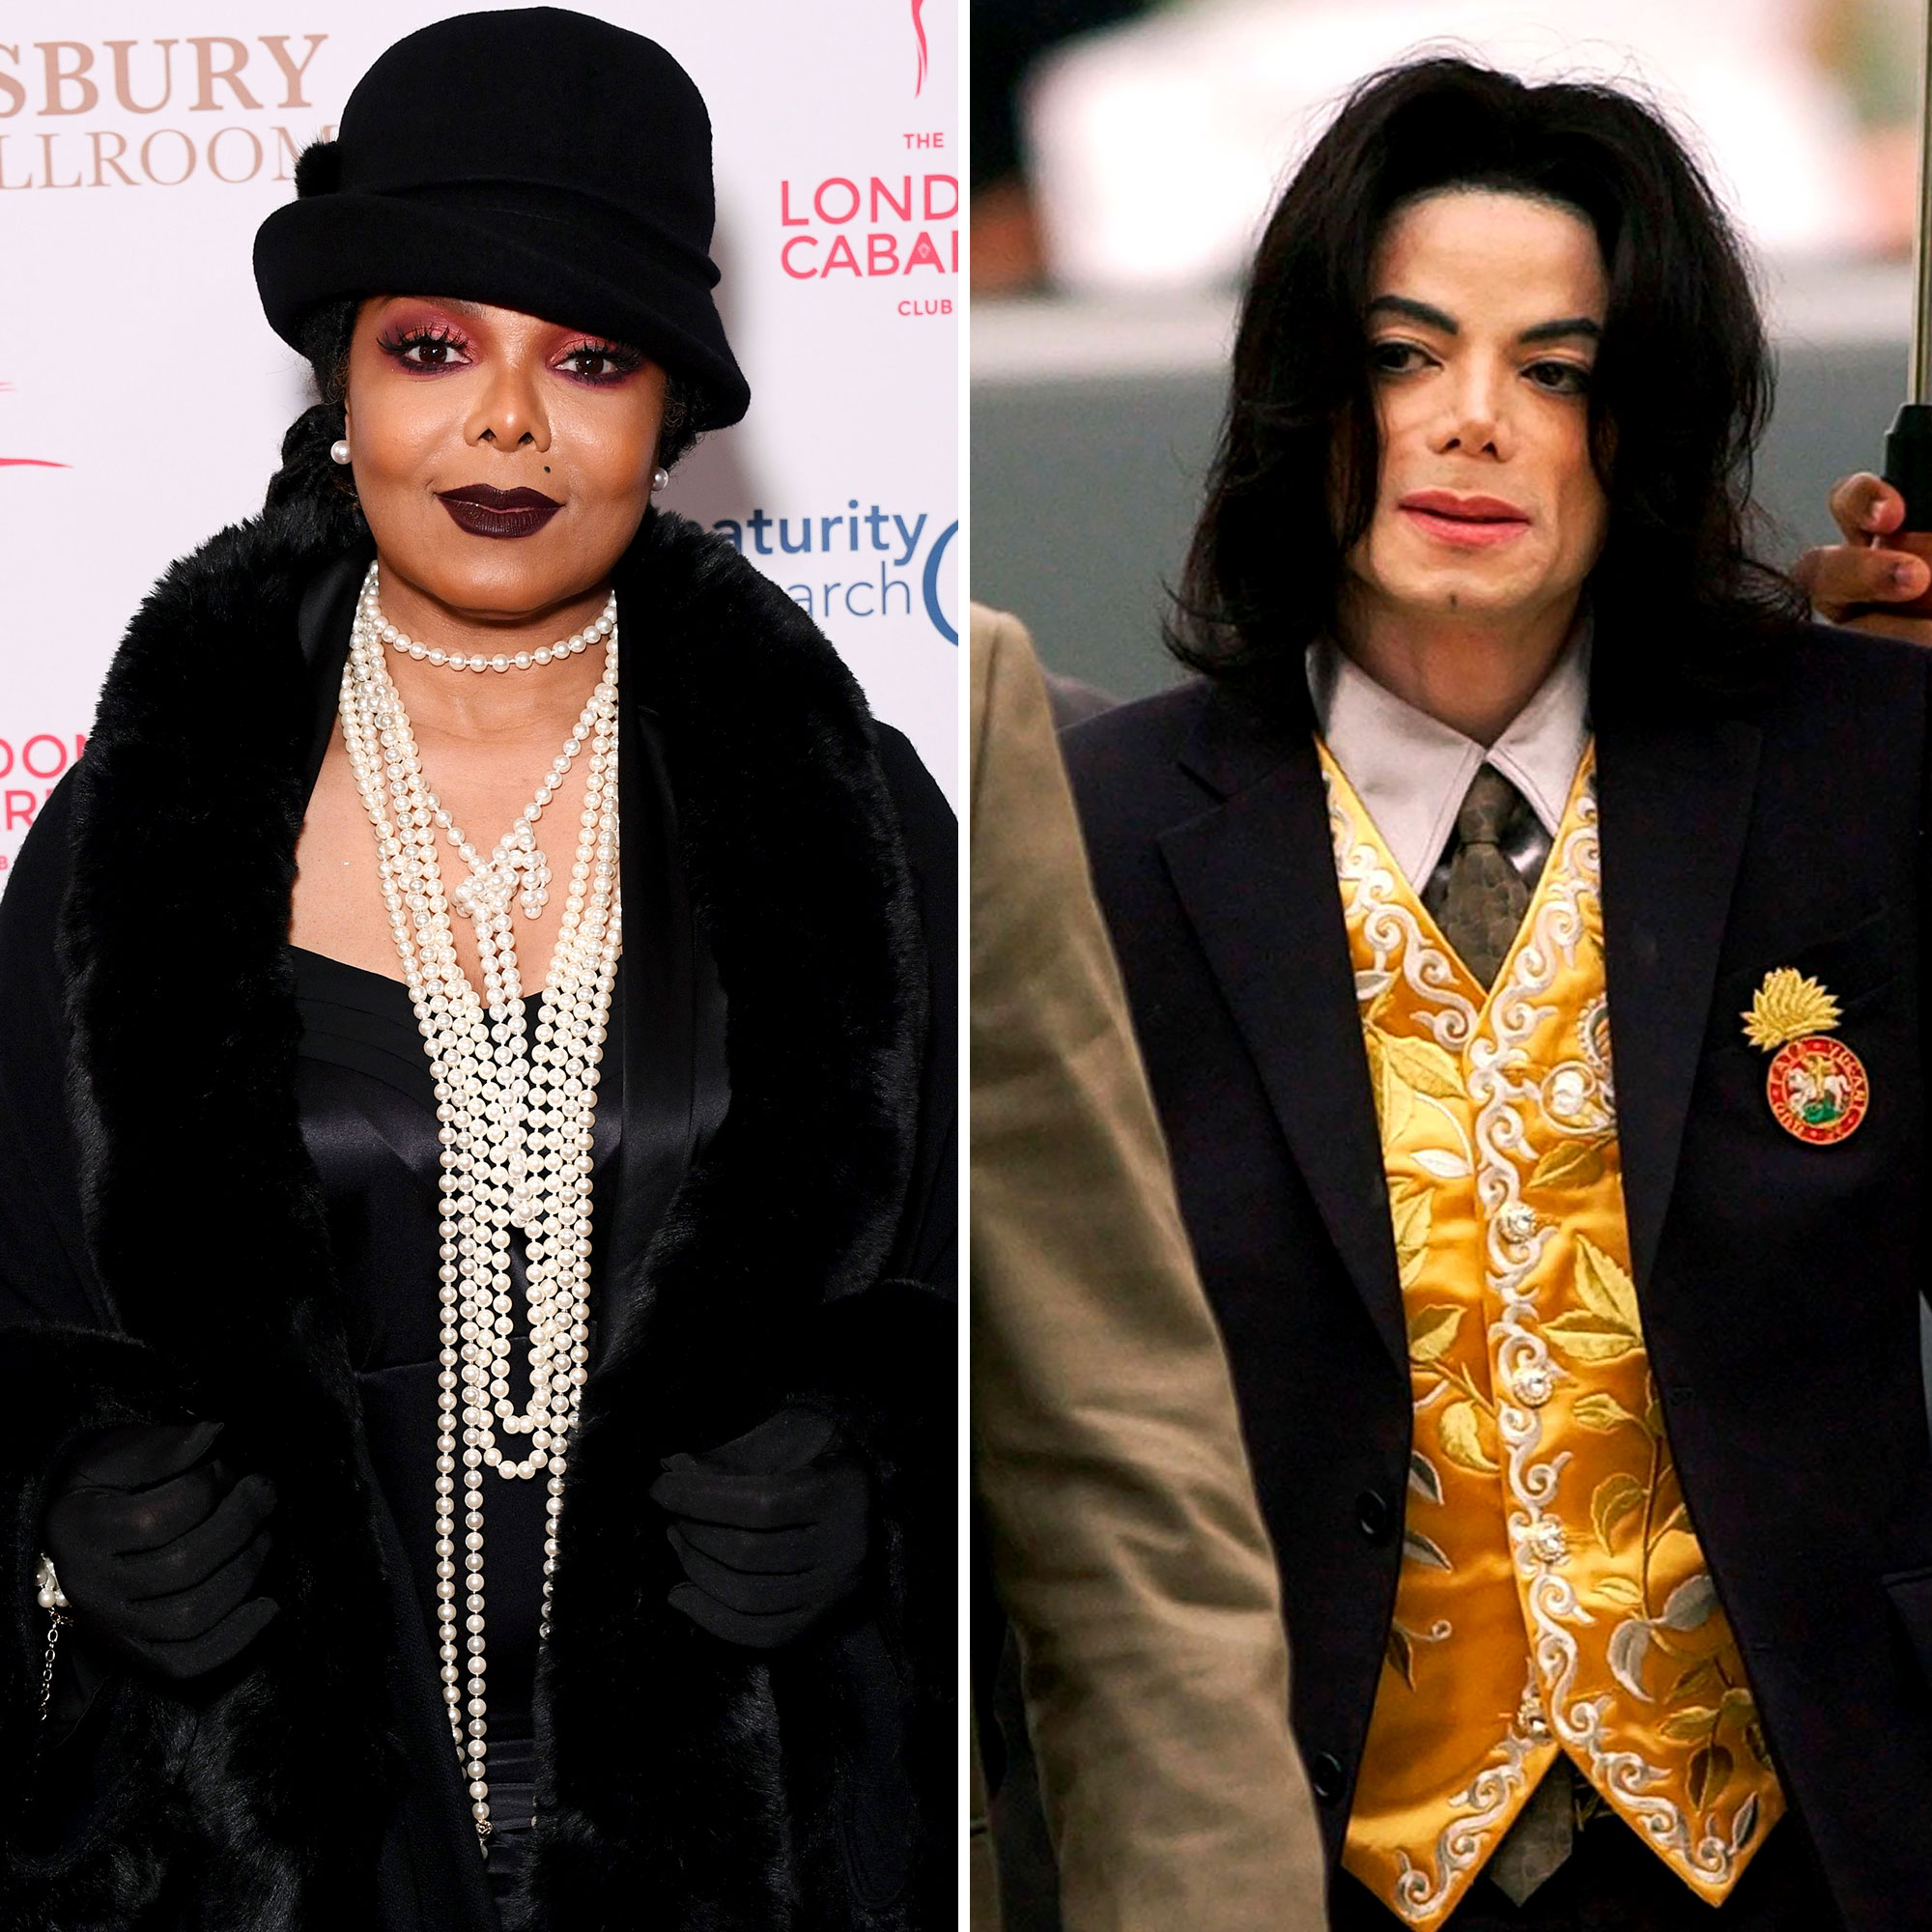 Janet Jackson Claims Michael Jackson Would Call Her 'Pig' and 'Cow'